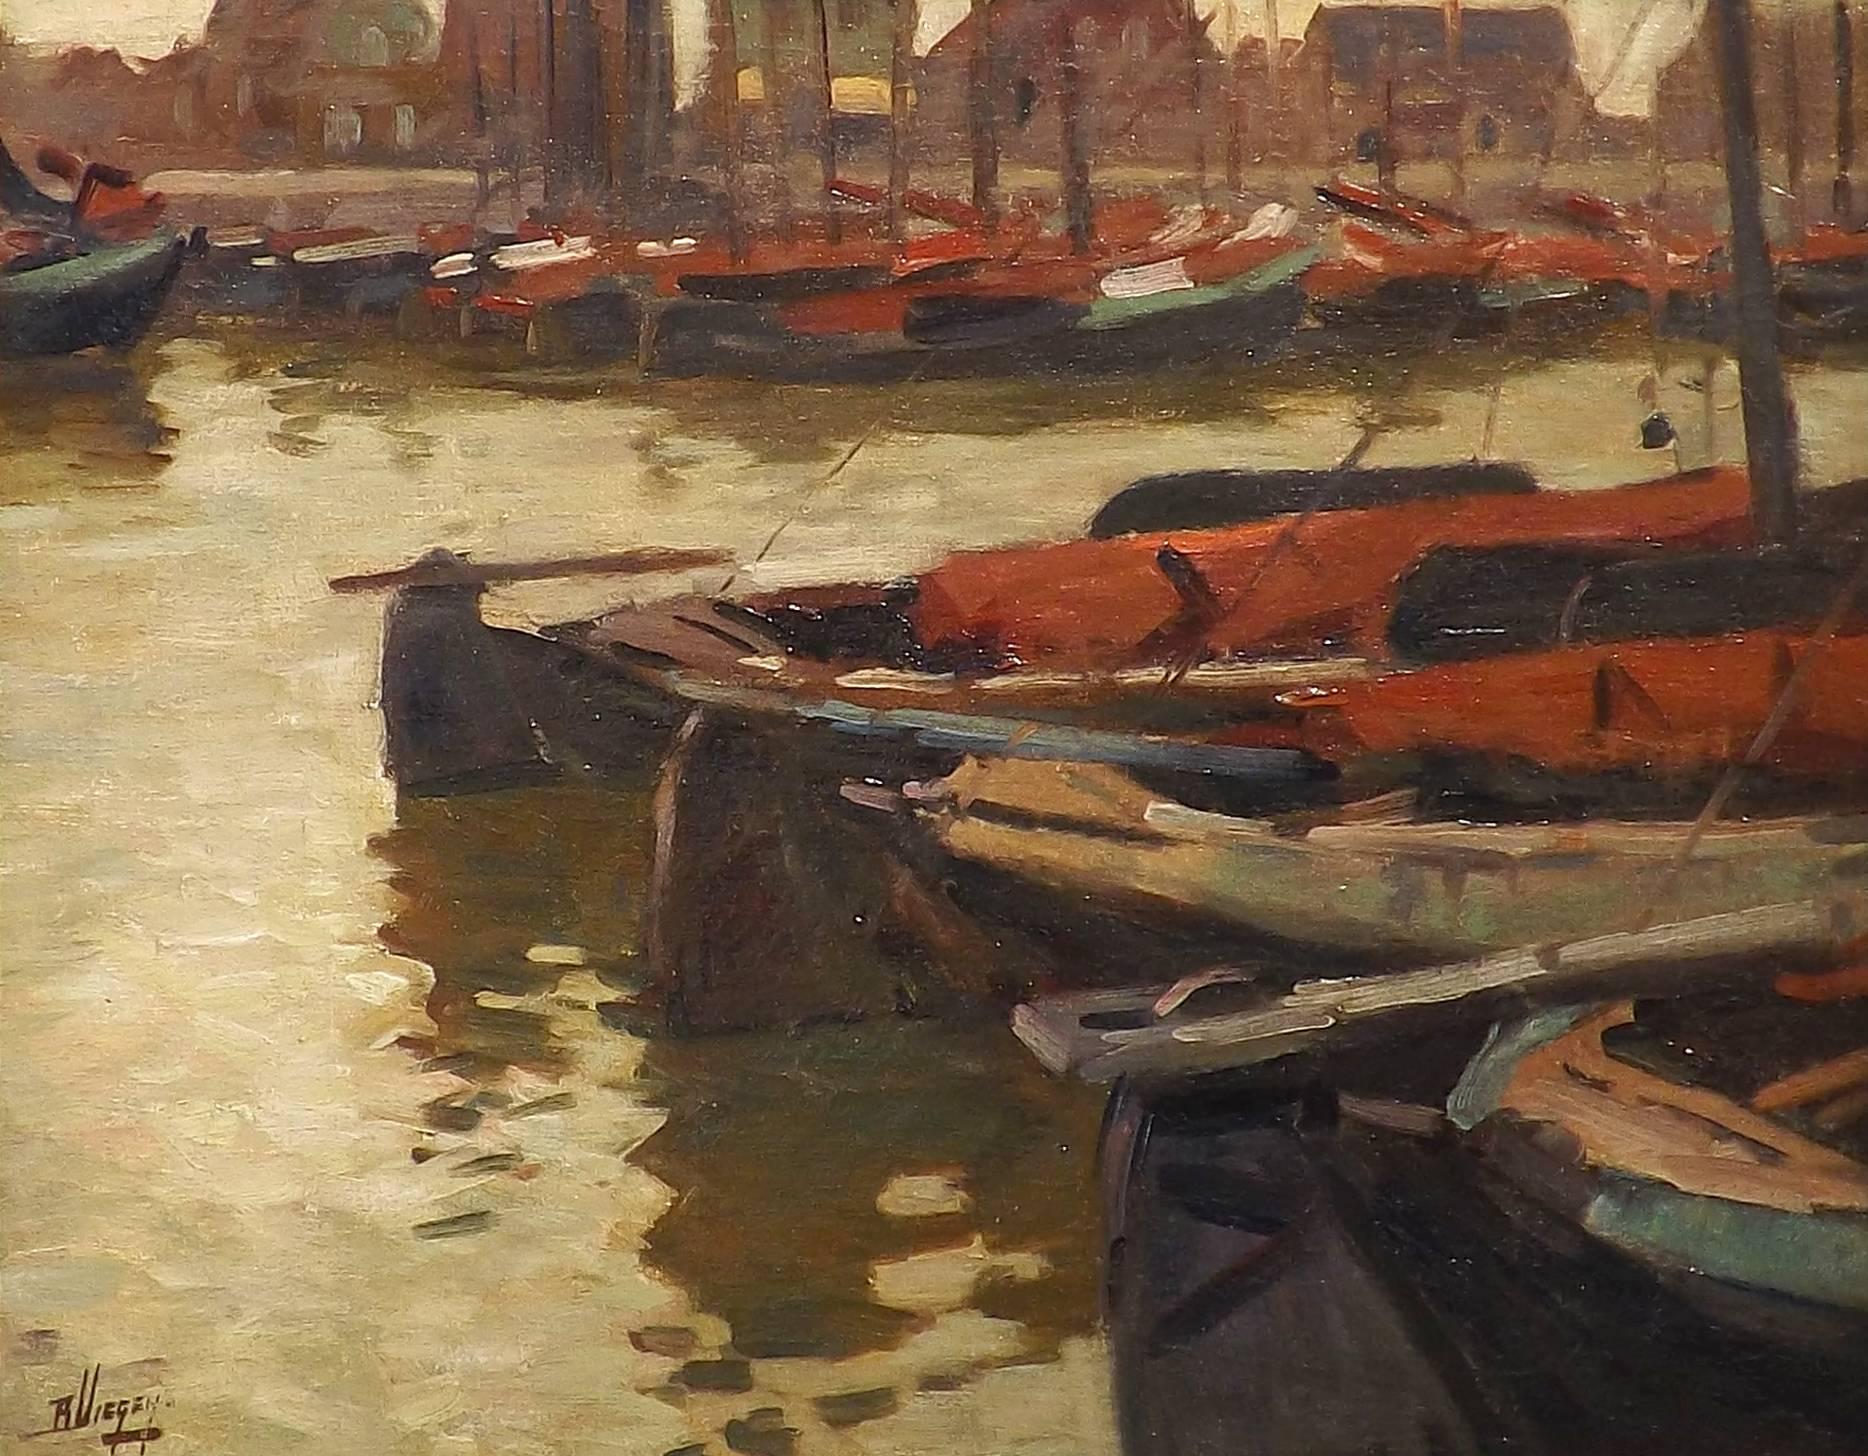 A masterfully painted scene of a quiet fishing harbor painted by the Dutch artist Benard 'Ben' Viegers. The waning light casts dappled shadows on the water surrounding the small fishing boats, their gear carefully stowed in preparation for morning's